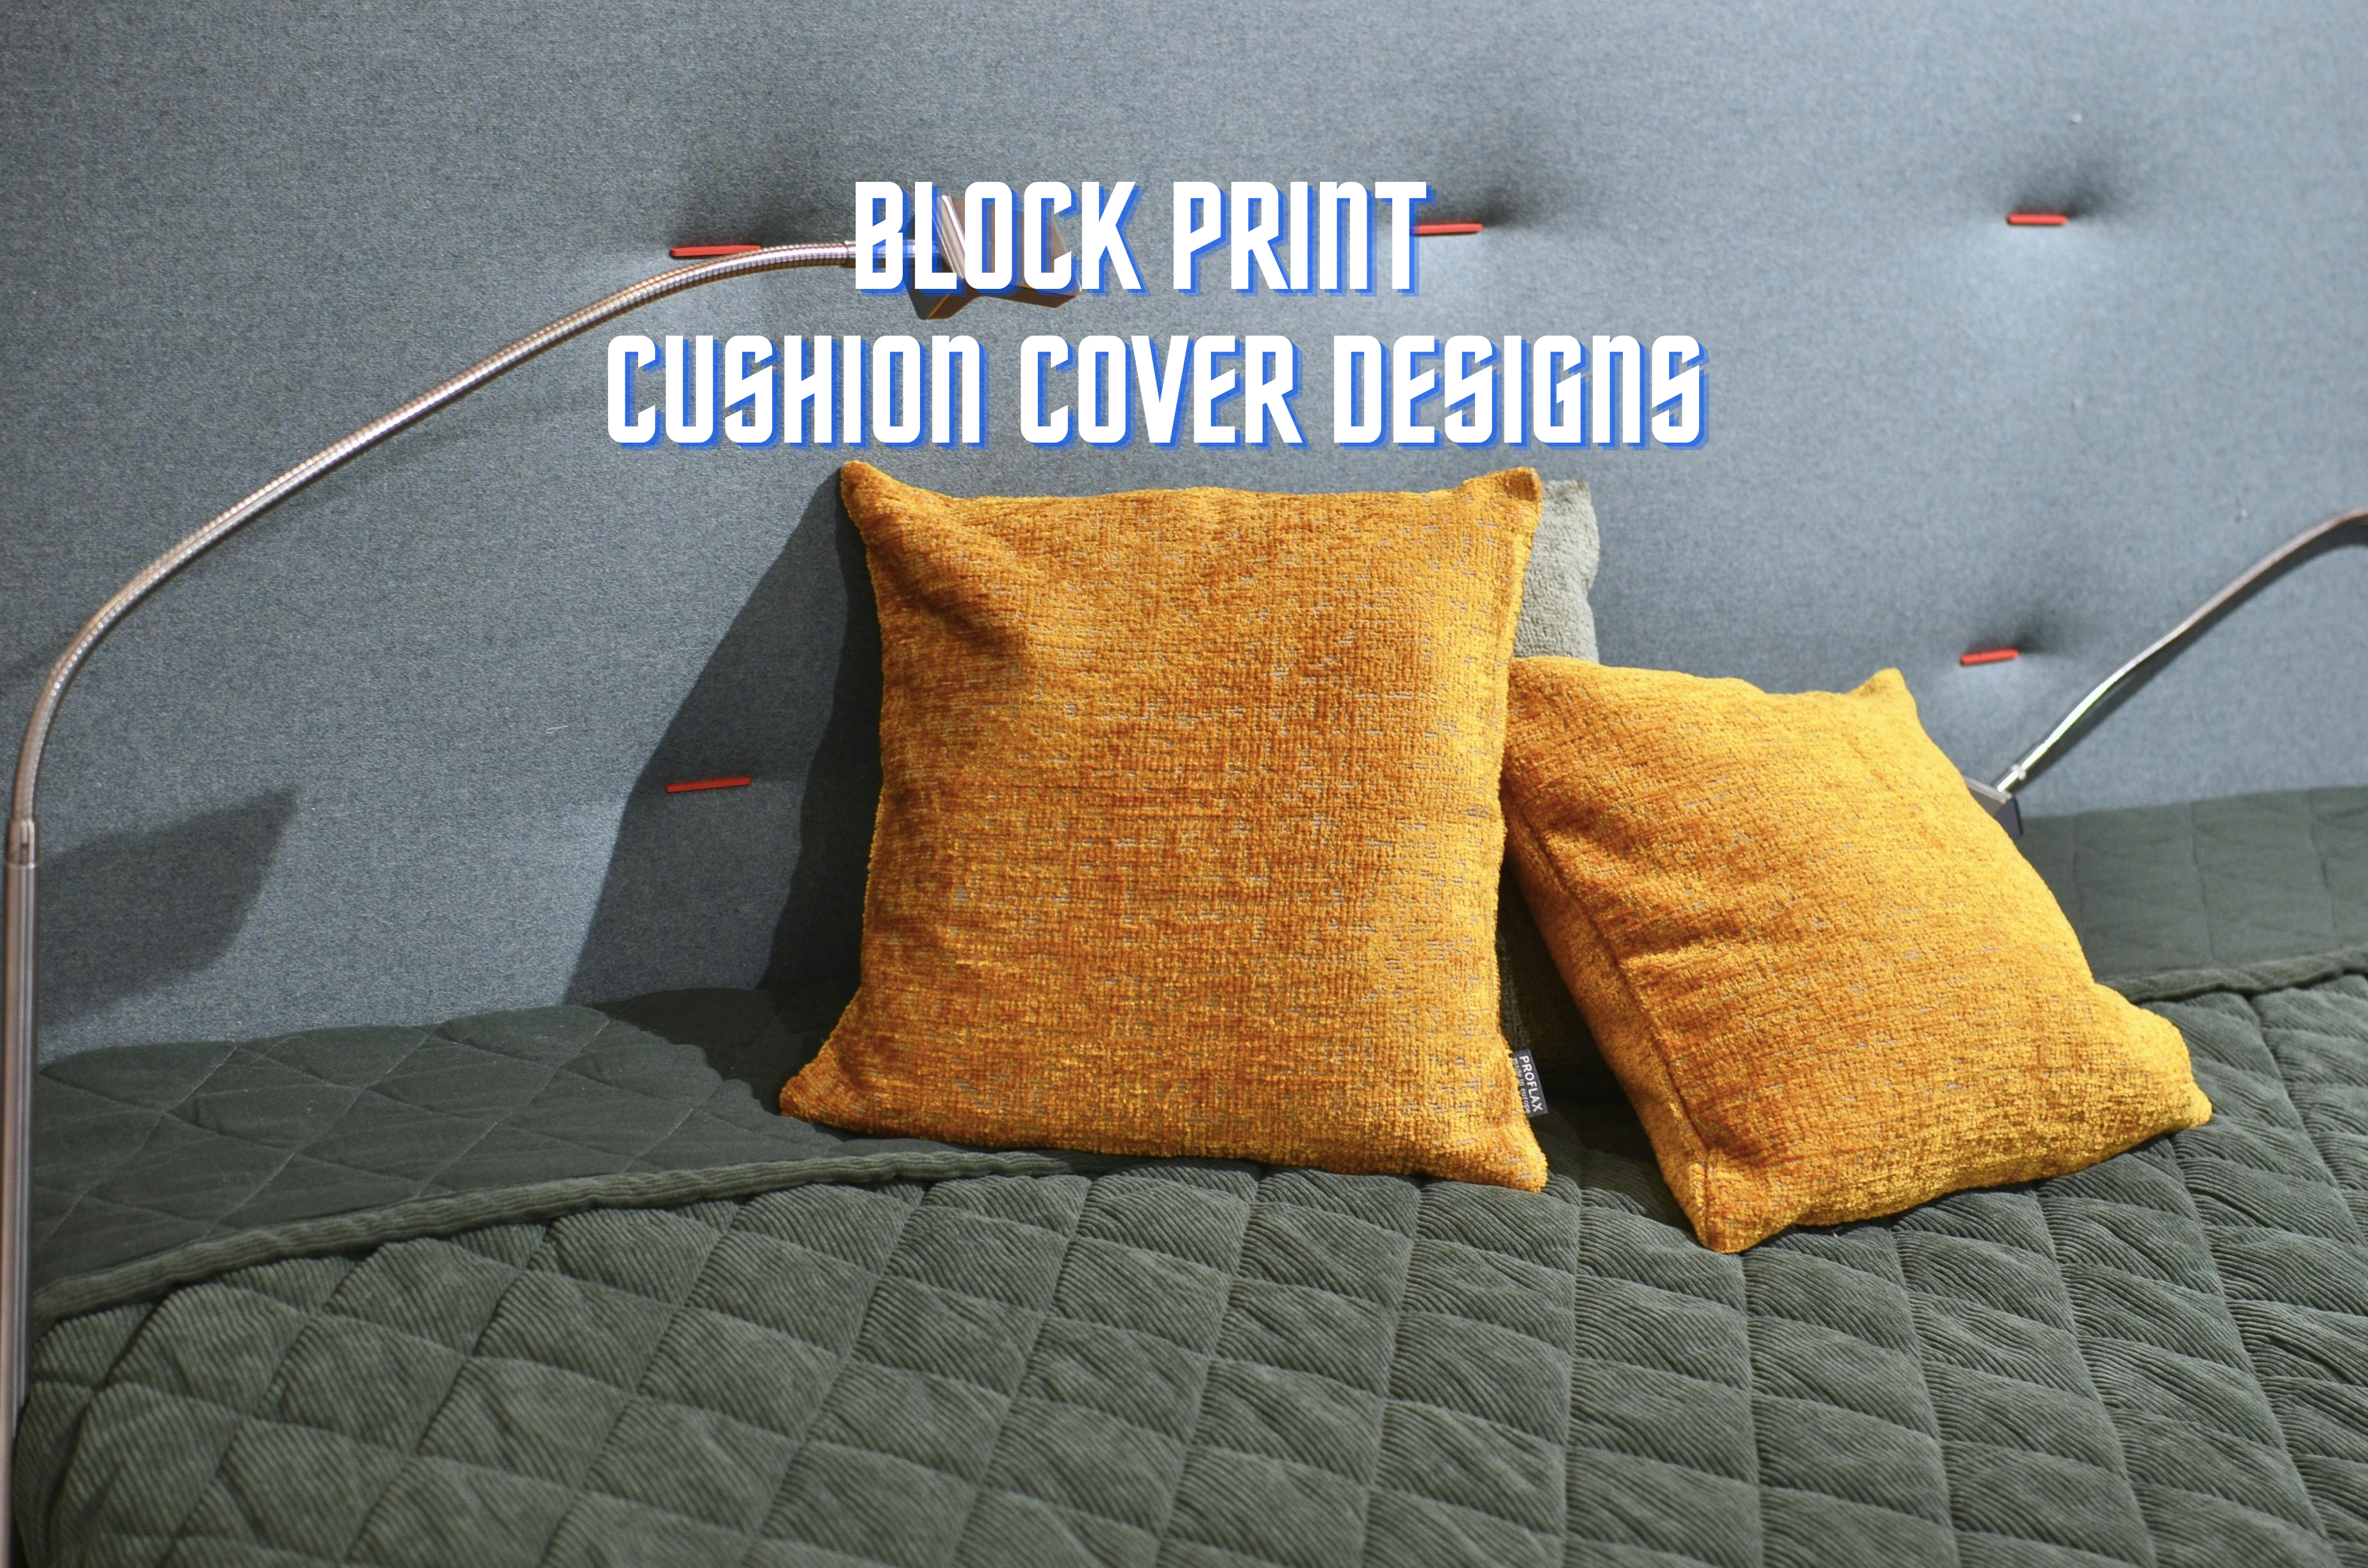 Enhance Your Home's Aesthetic with Handmade Block Print Cushion Covers